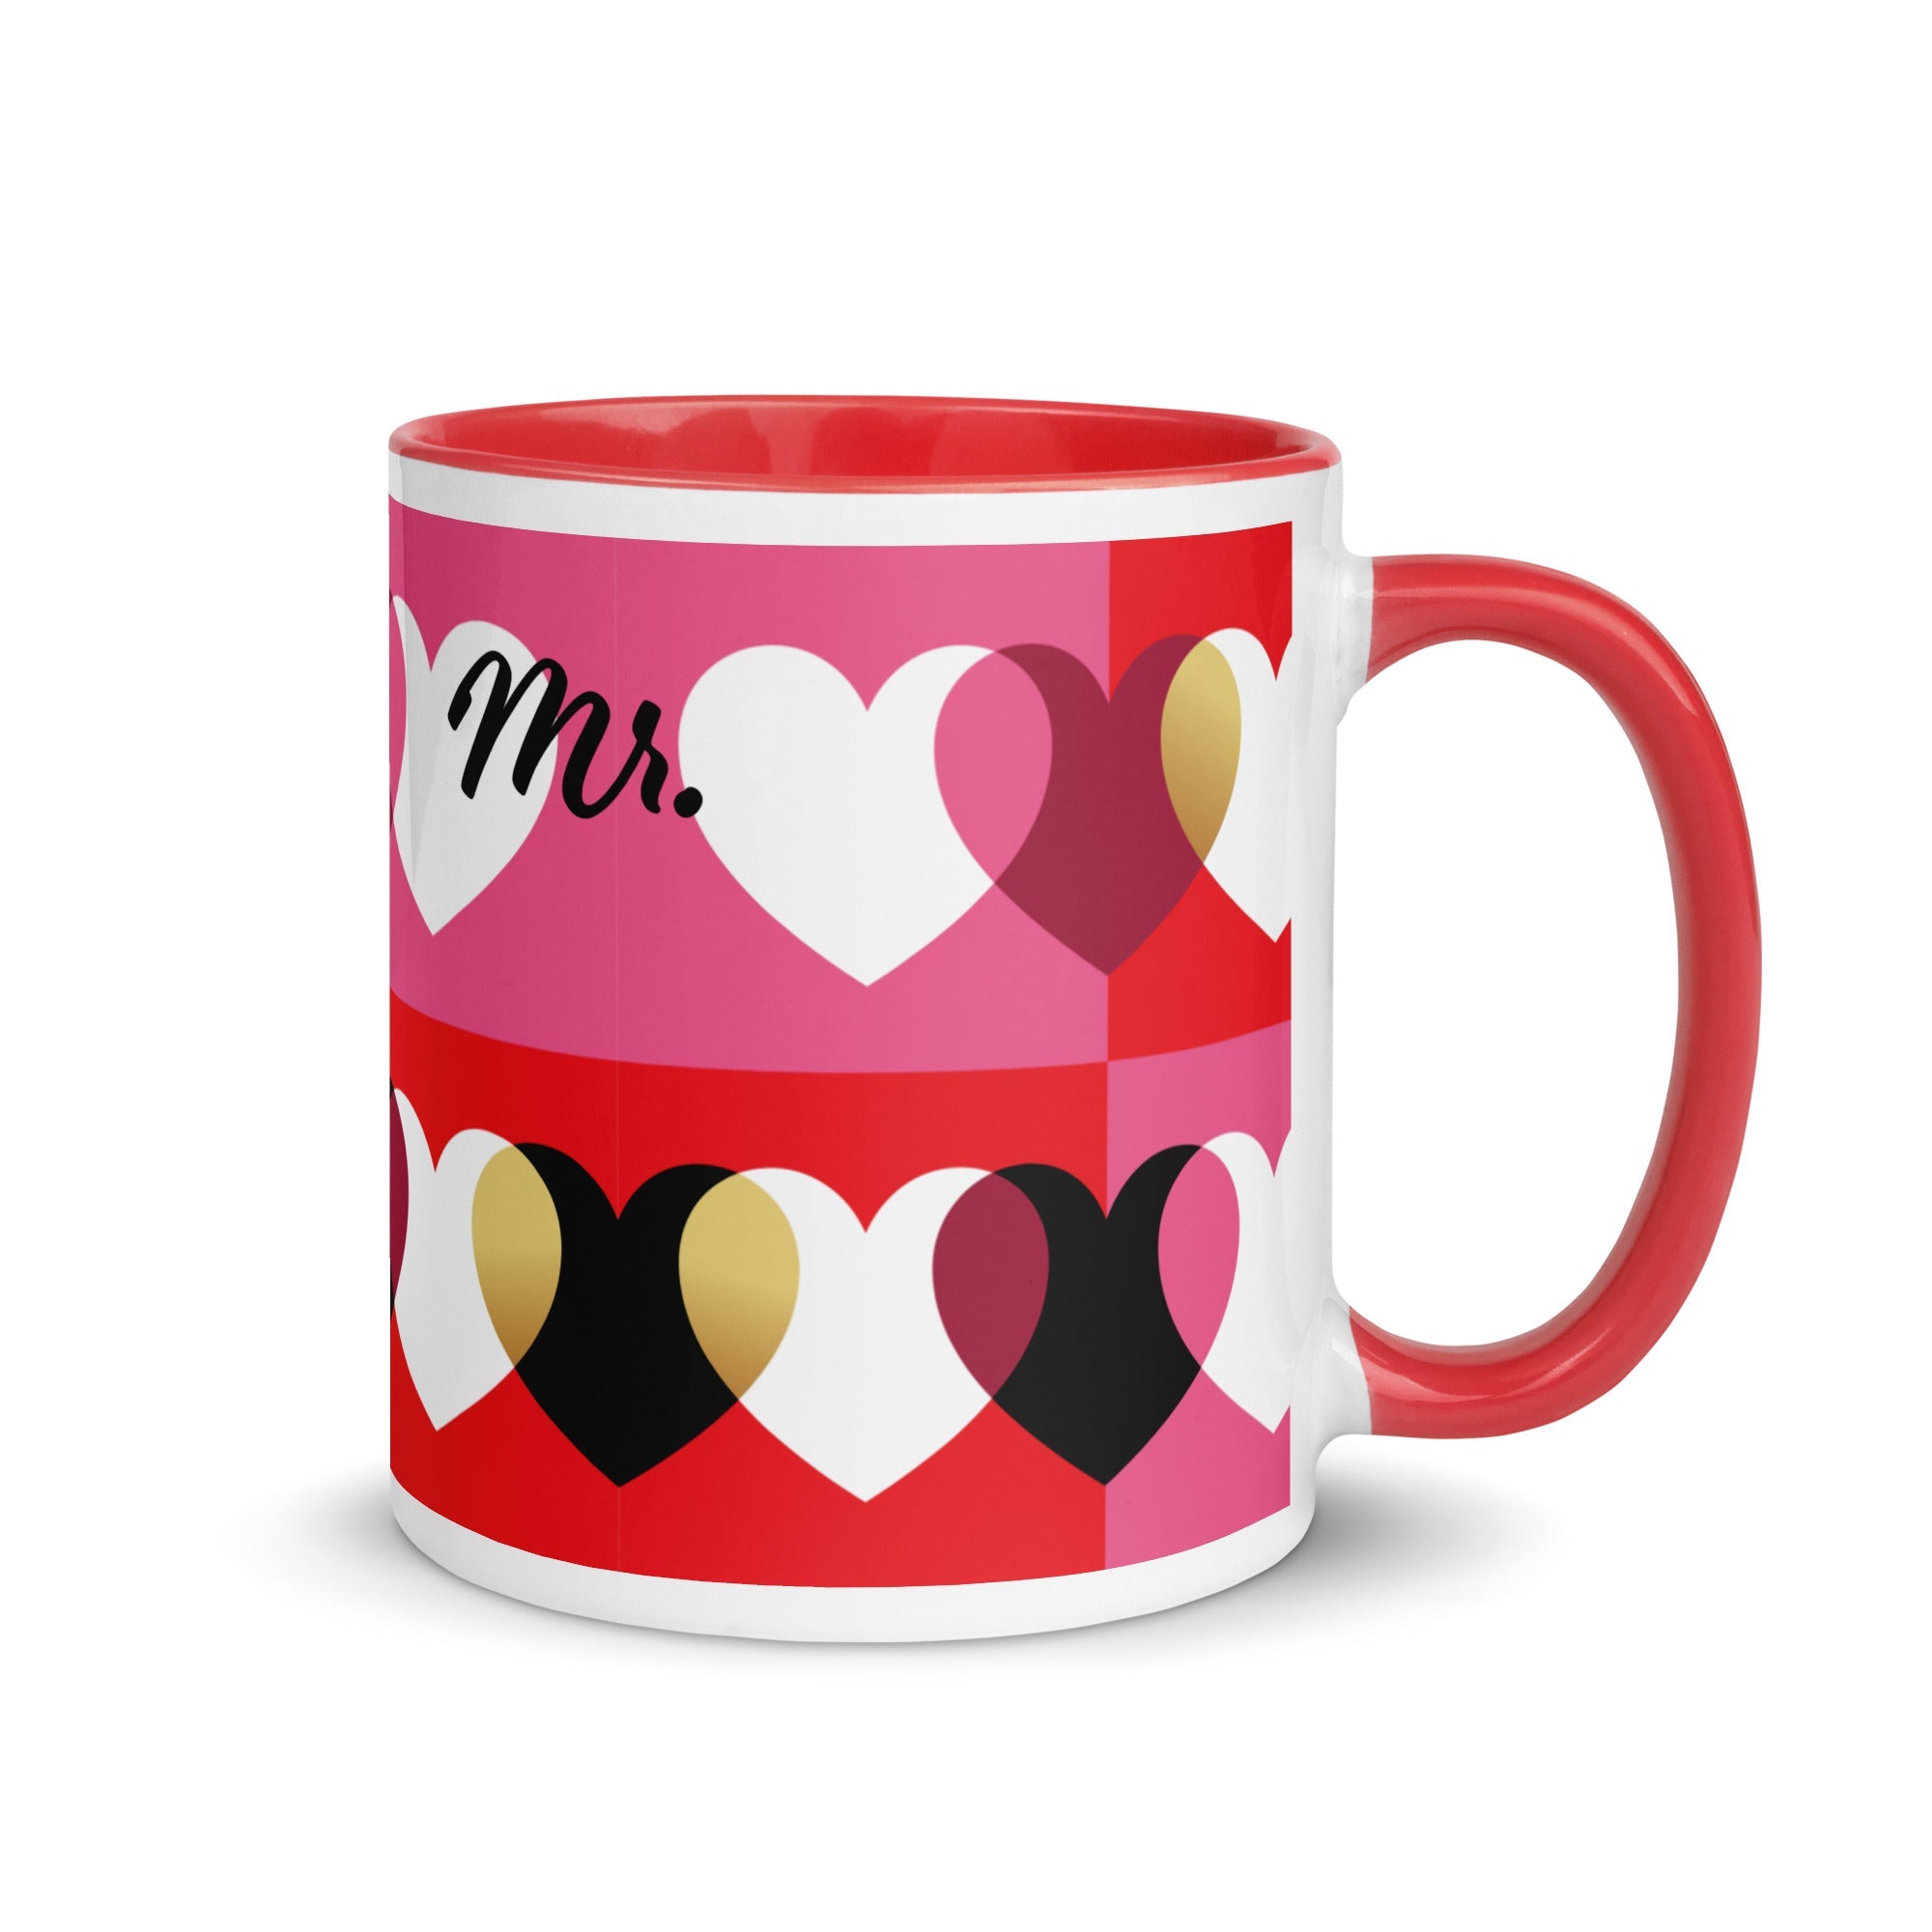 Love Mug set of 2, black and red, Mr. and Mrs, personalised-15